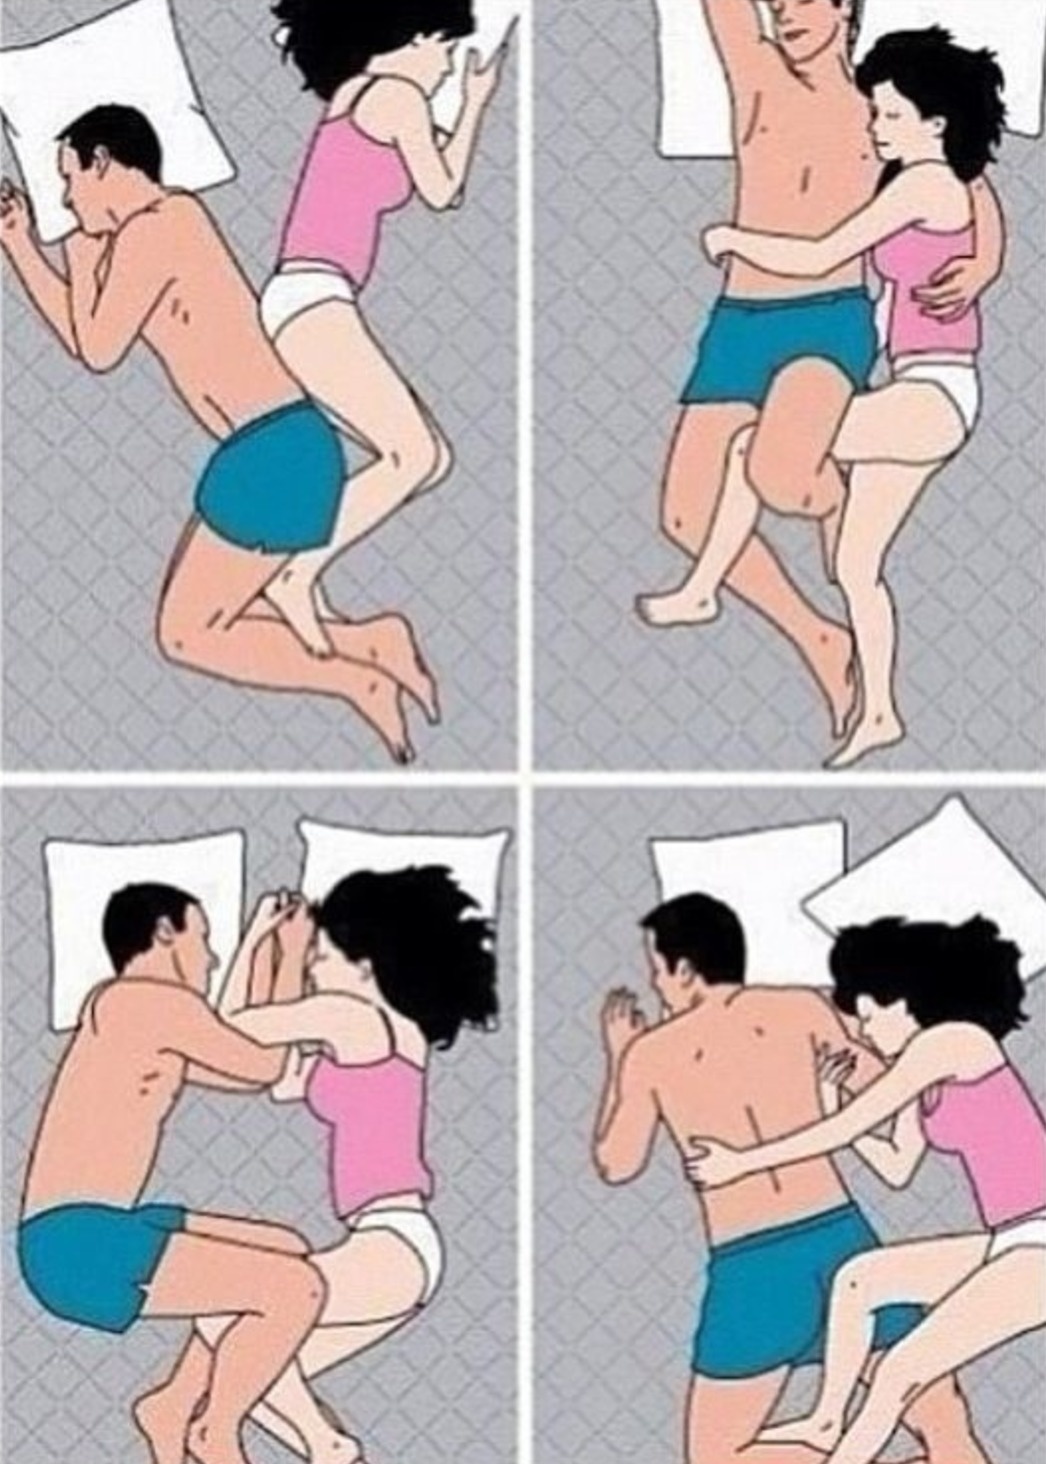 The four stages of sleeping together. 